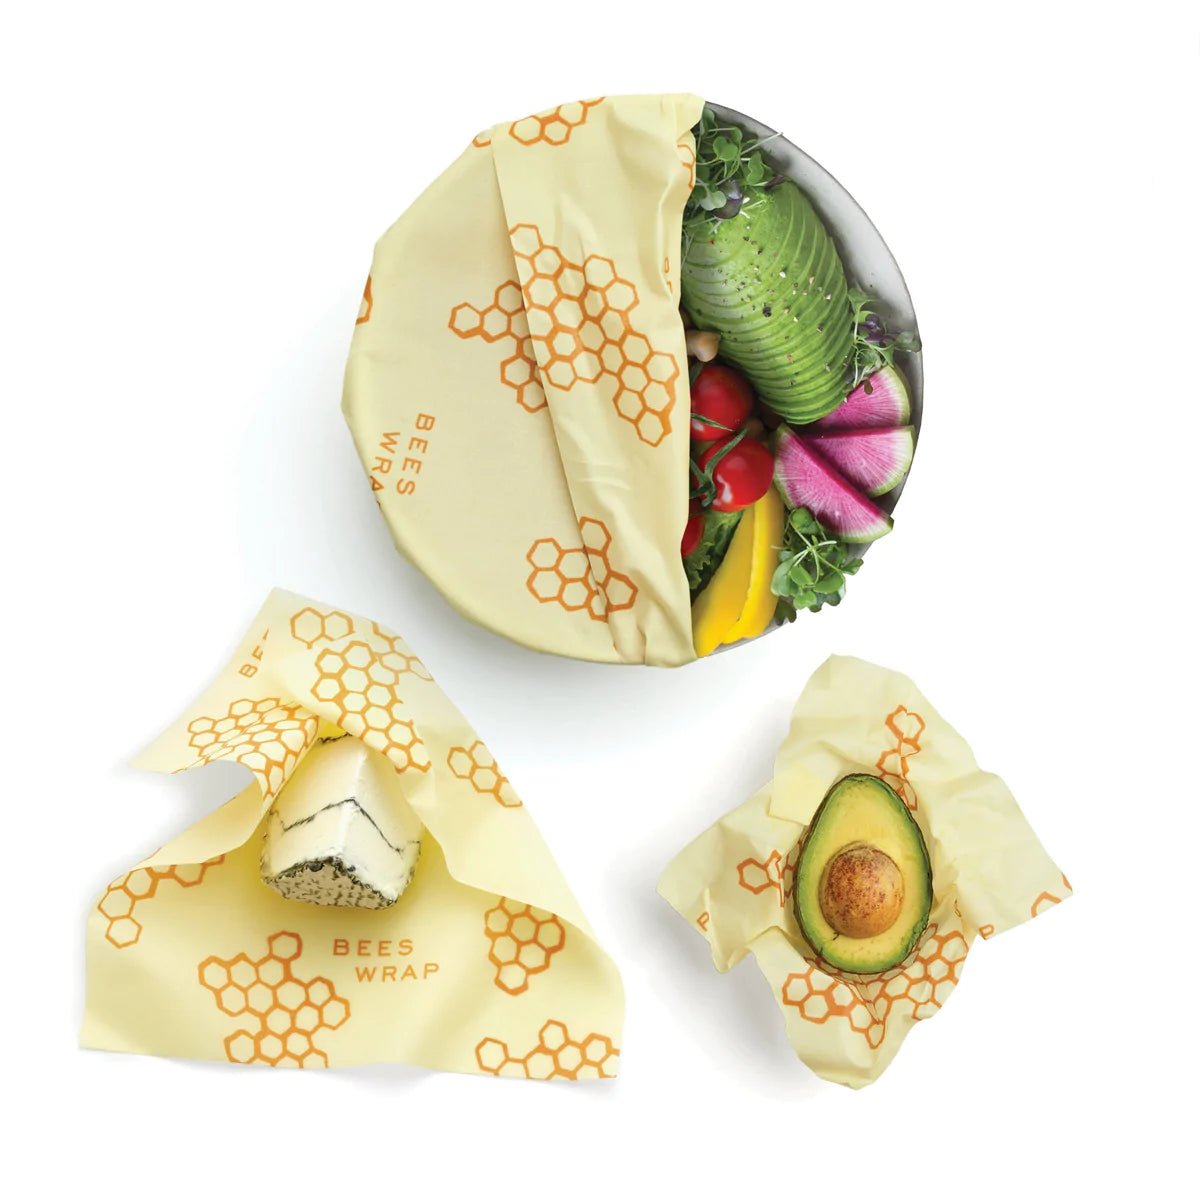 A sealed bowl, and two fruits sealed directly with Bee's Wrap.